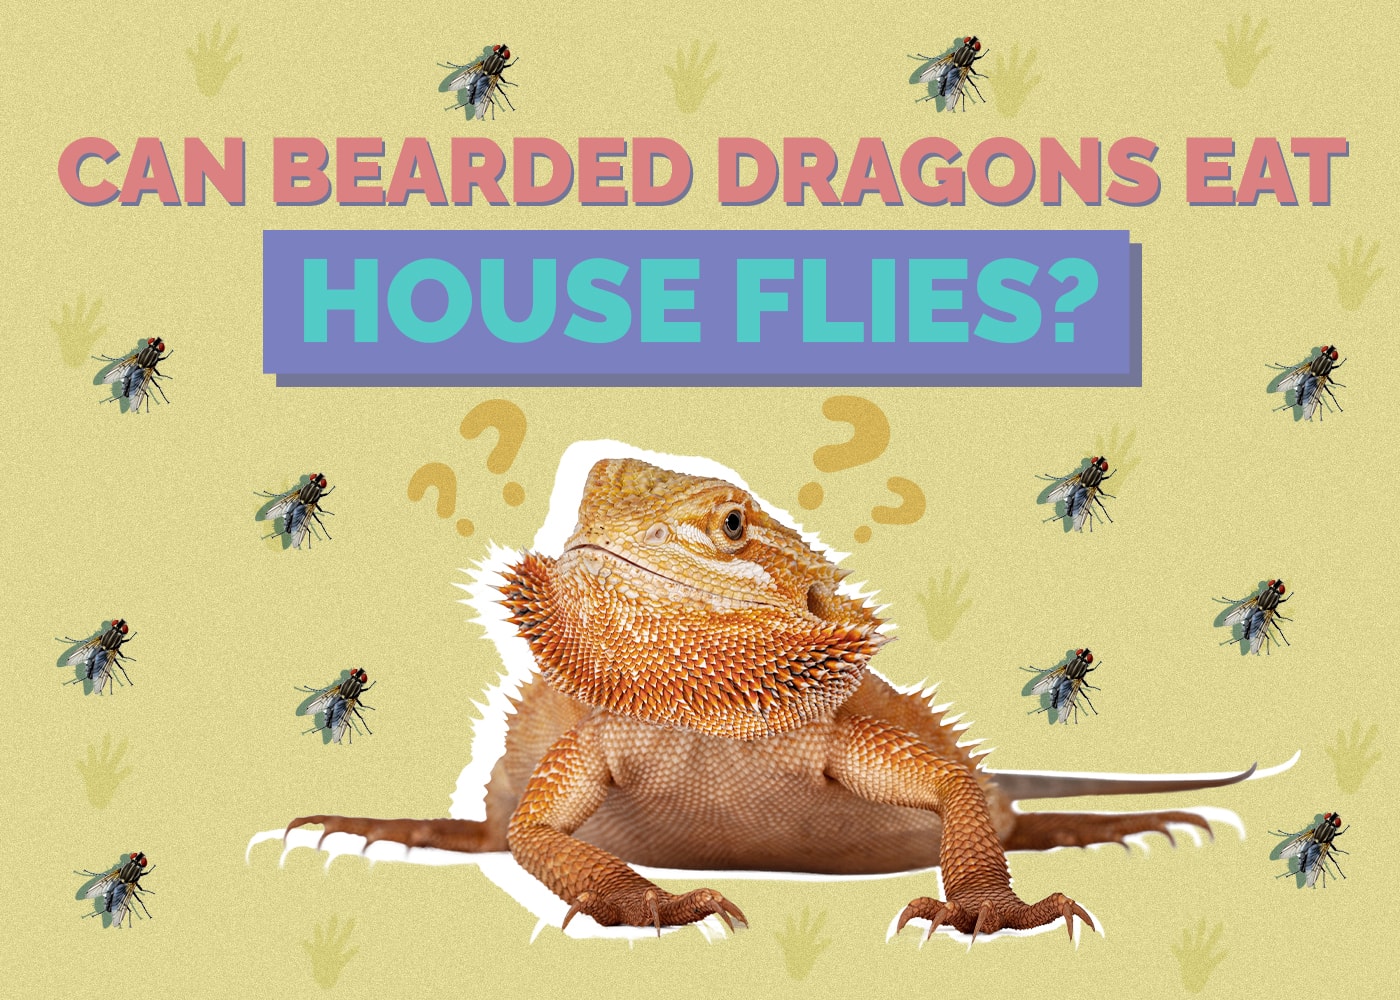 Can Bearded Dragons Eat House Flies